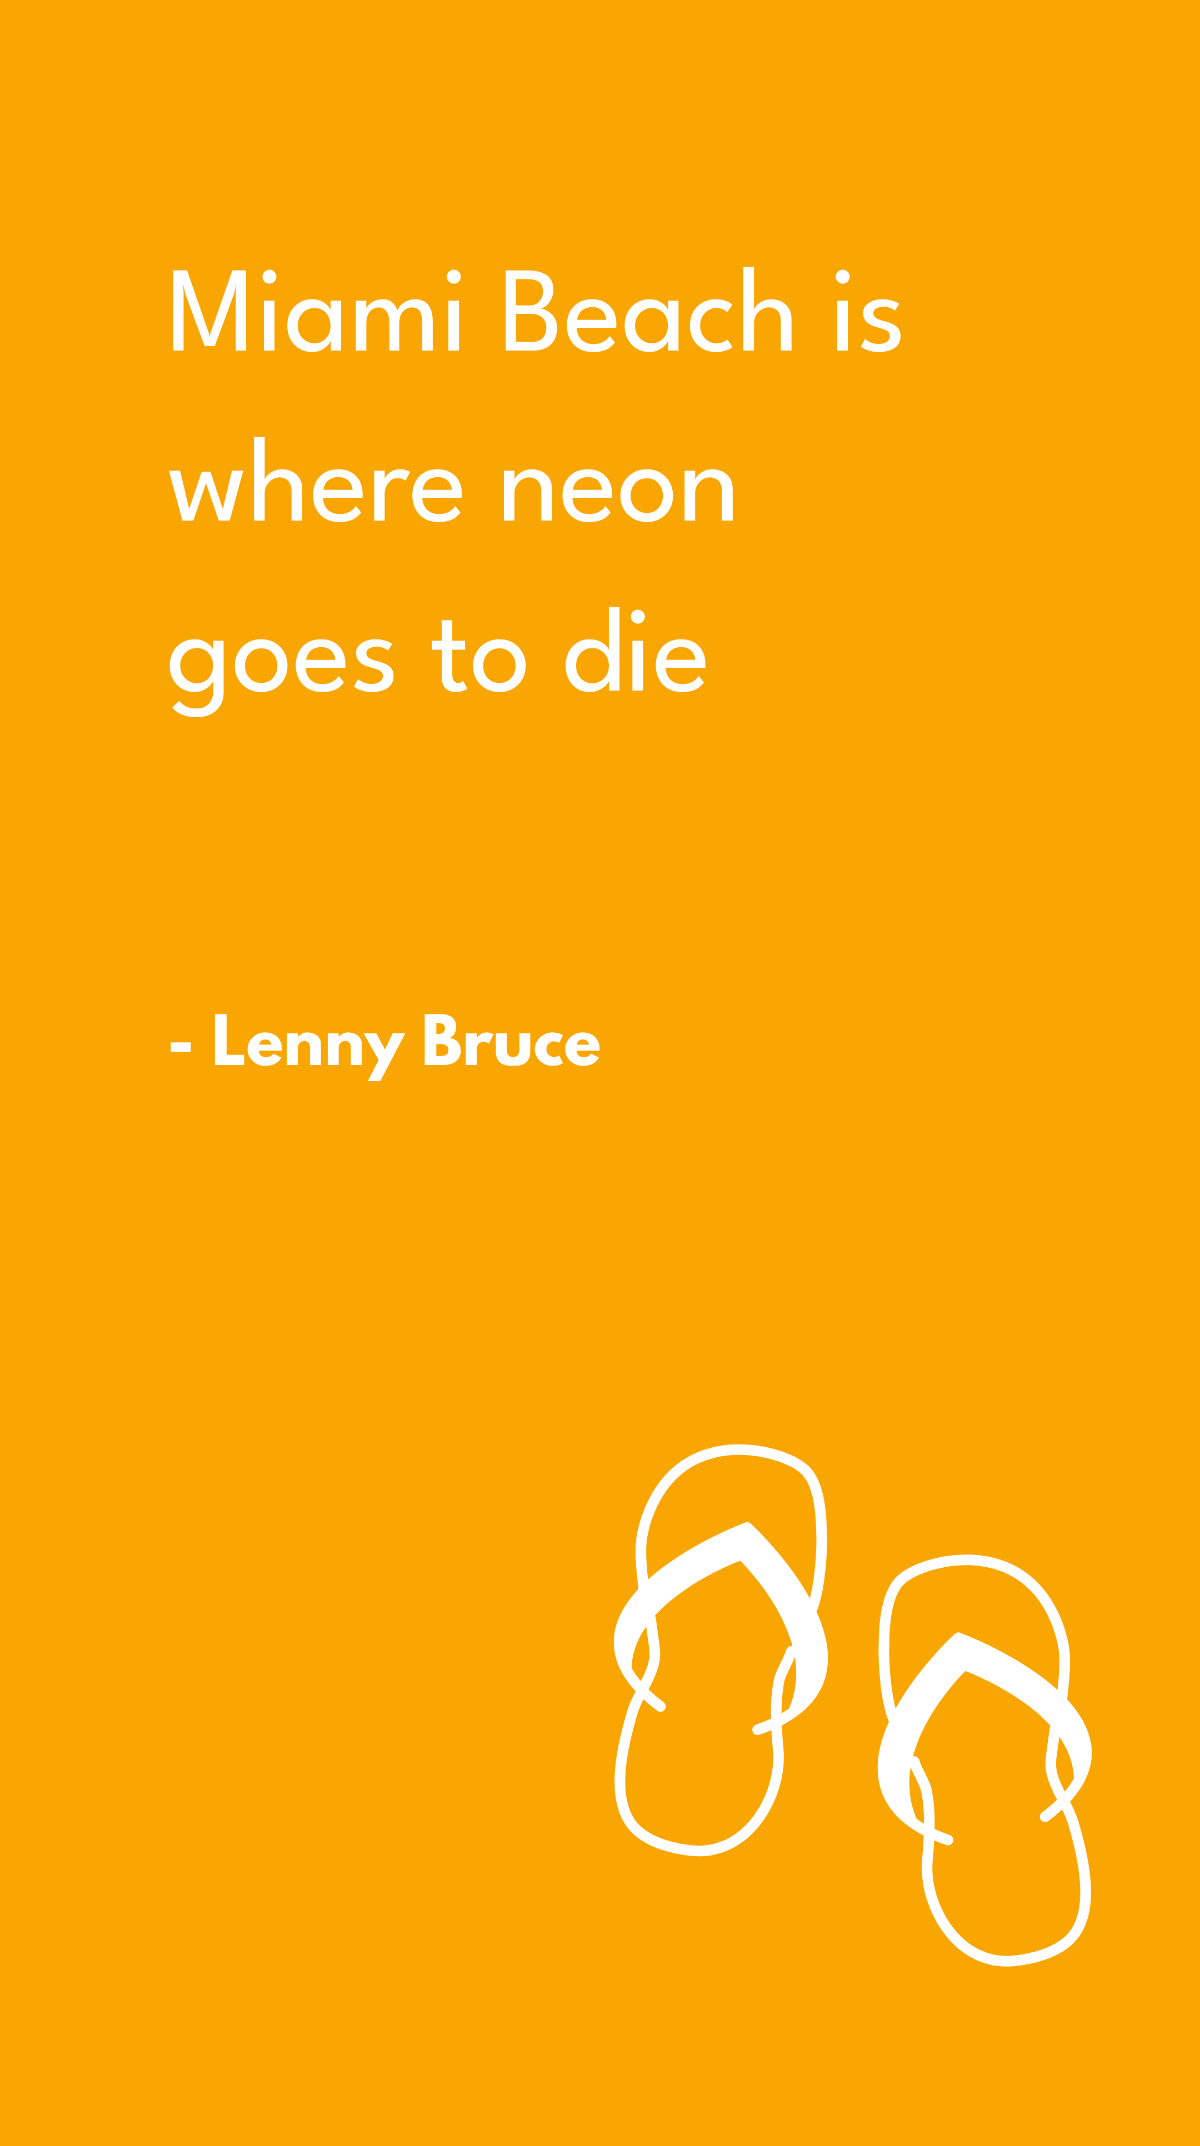 Lenny Bruce - Miami Beach is where neon goes to die Template